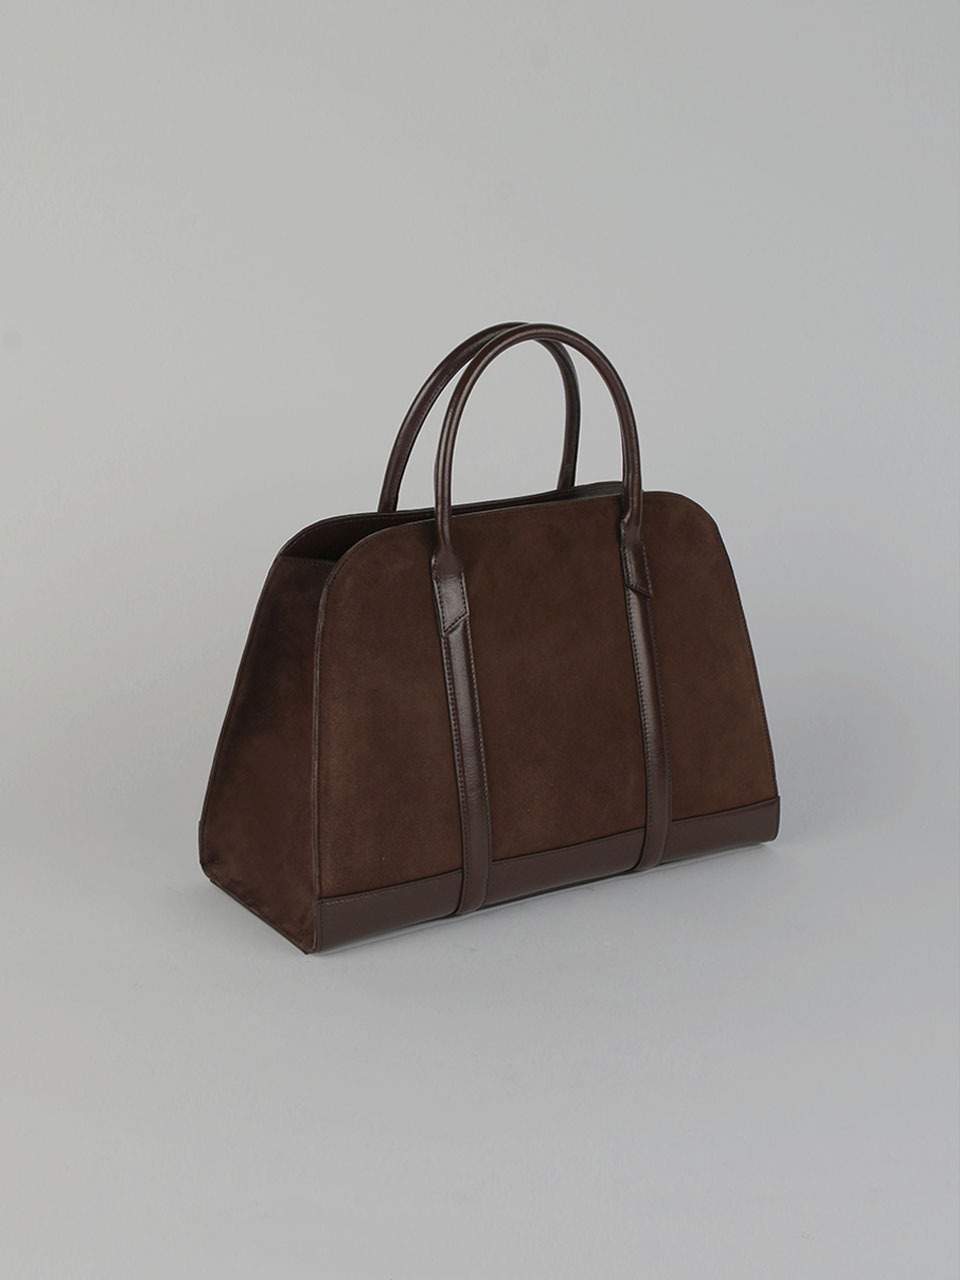 SAC MARCHER IN SUEDE BROWN